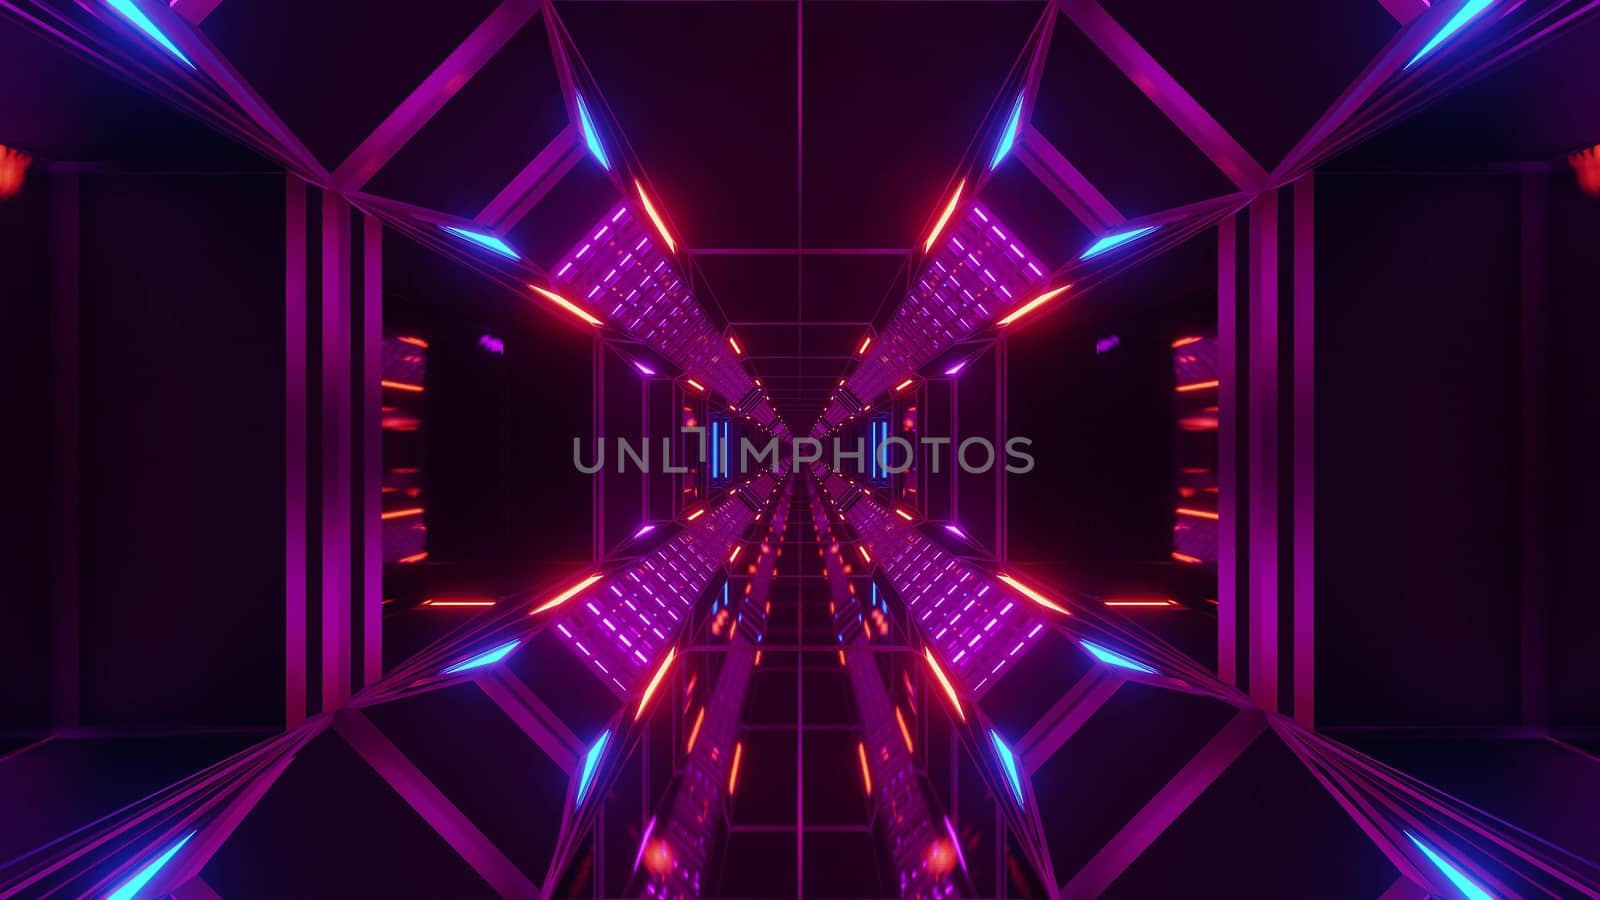 futuristic science-fiction tunnel corridor with metal steal wire-frame kontur and endless glowing lights 3d illustration background wallpaper graphic design by tunnelmotions